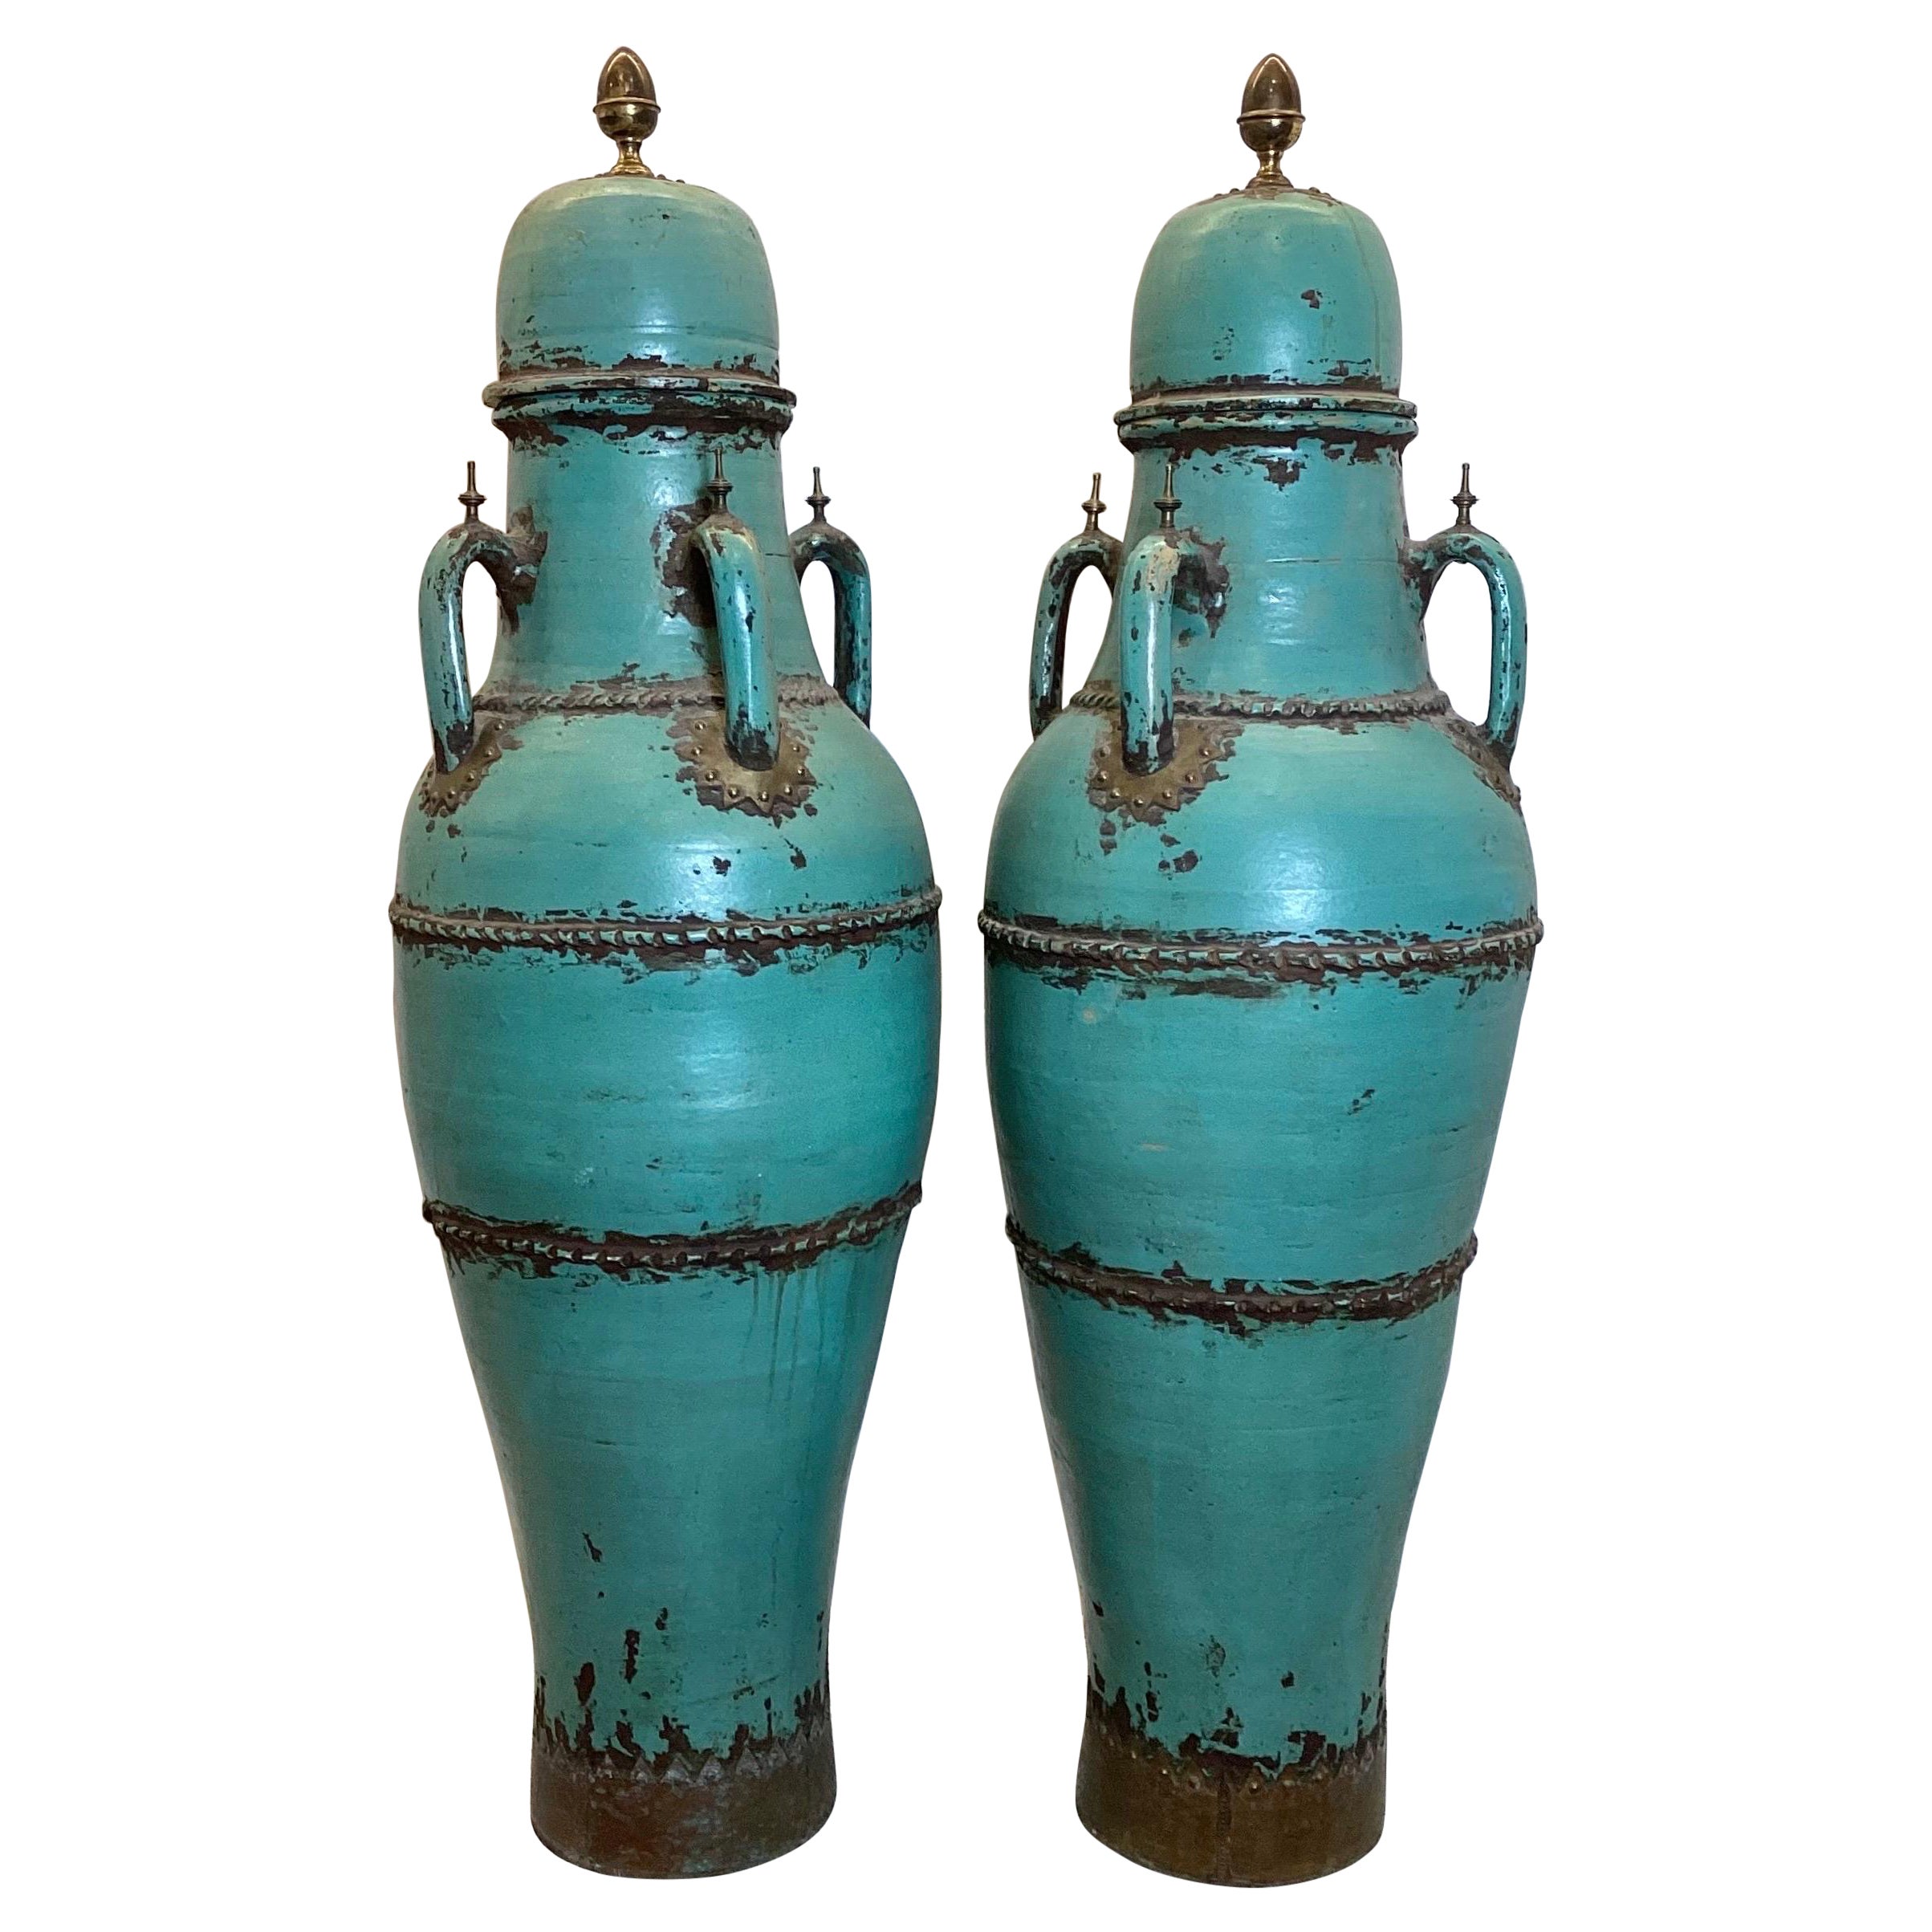 A Pair of Monumental Four Handled Tall Pottery Urns For Sale